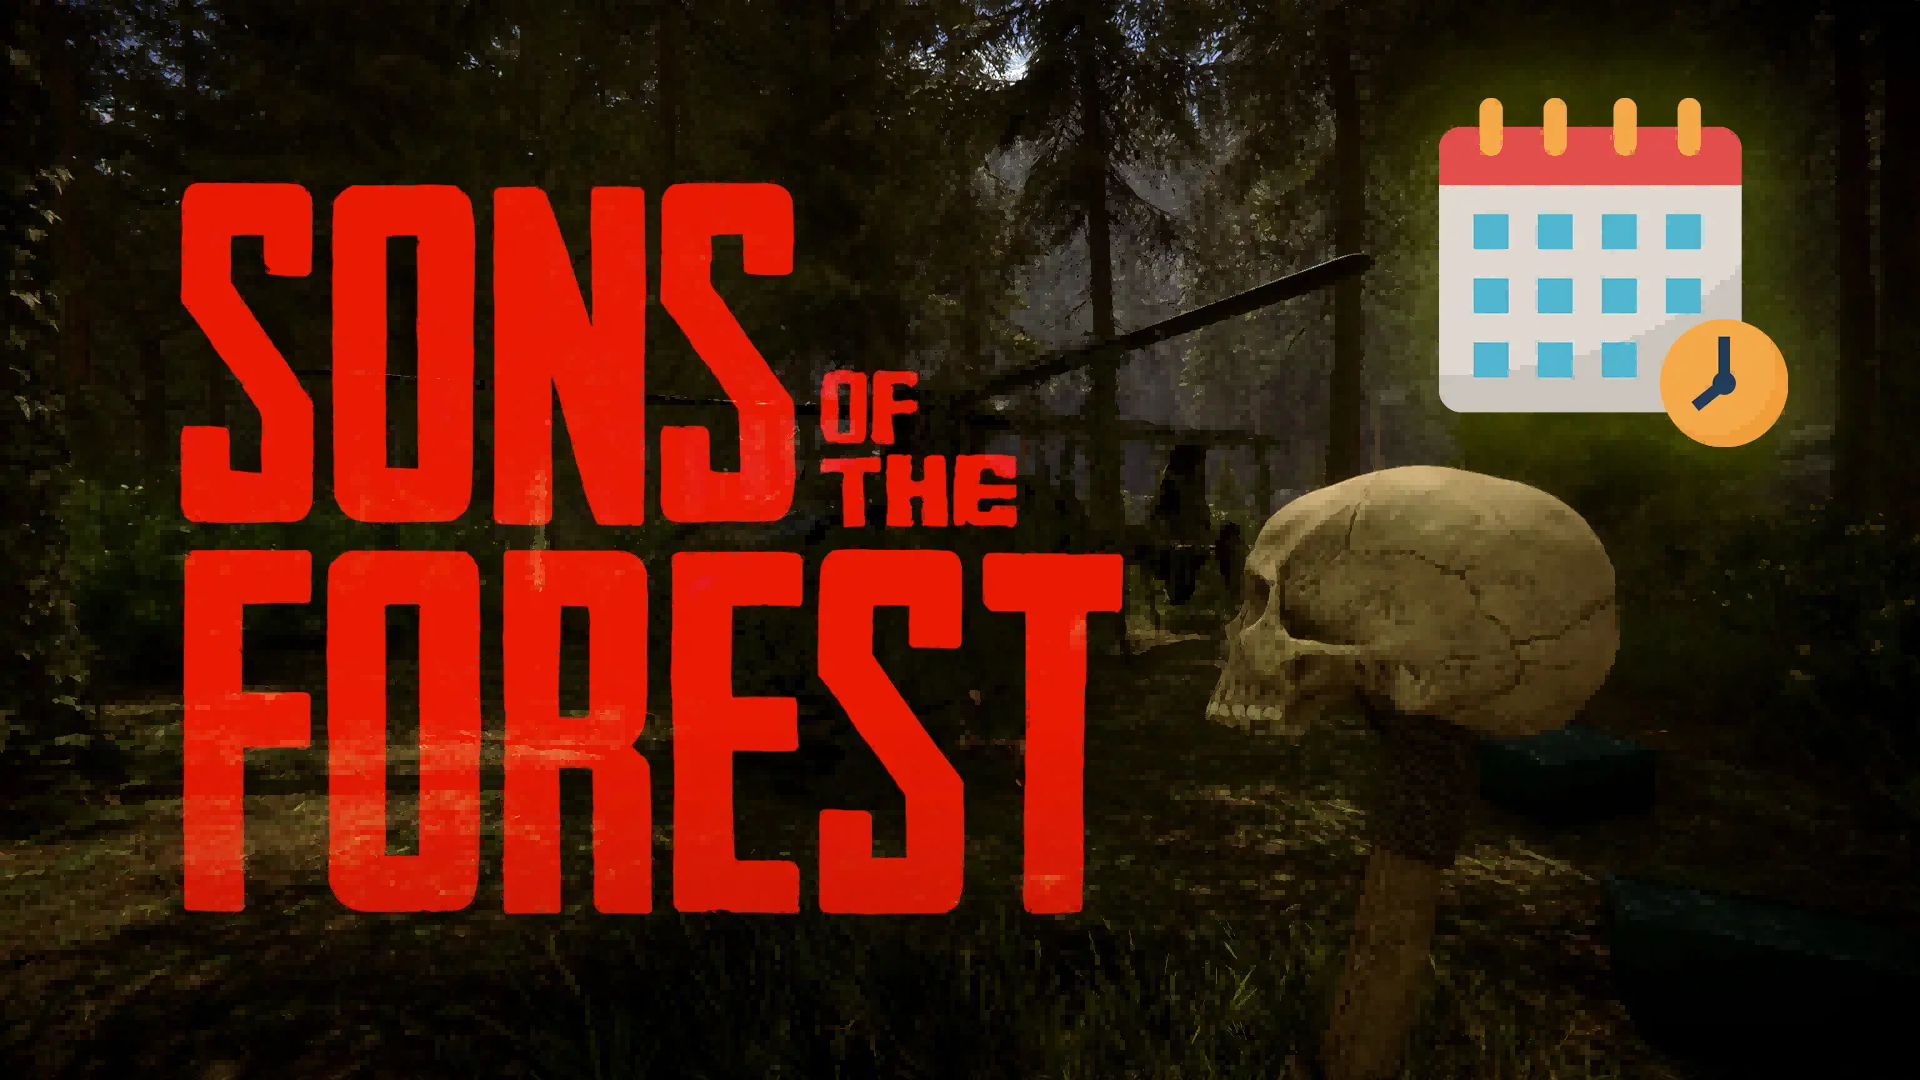  [Sons Of The Forest] Fresh Steam Account + Full Access + Changeable Email + Fast Delivery